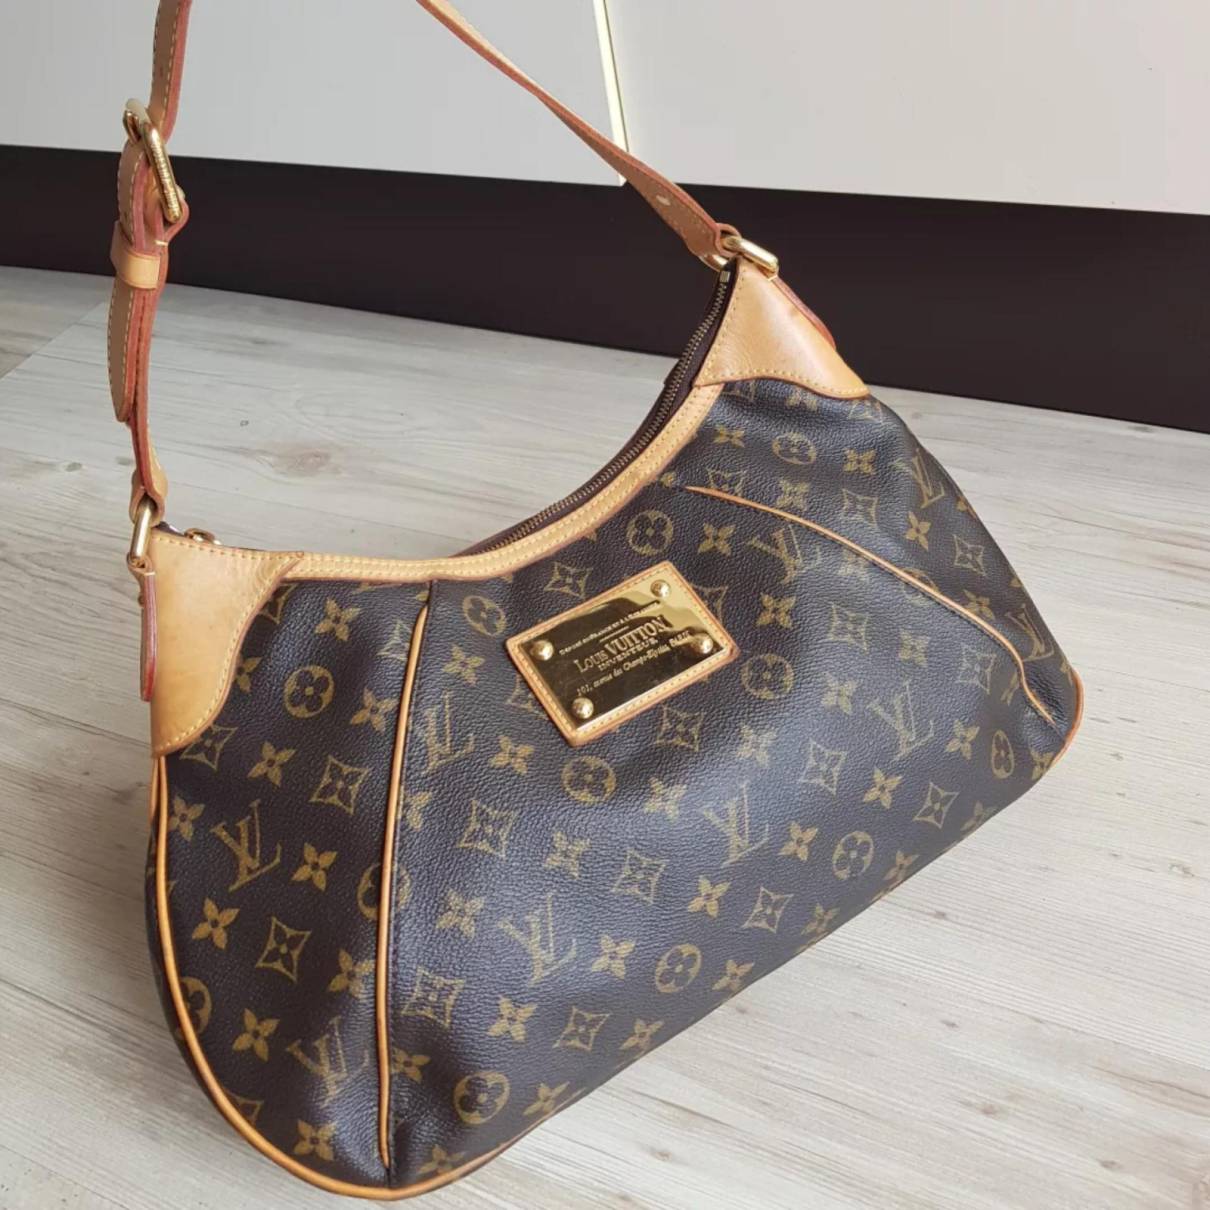 Louis Vuitton - Authenticated Thames Handbag - Cloth Brown for Women, Very Good Condition